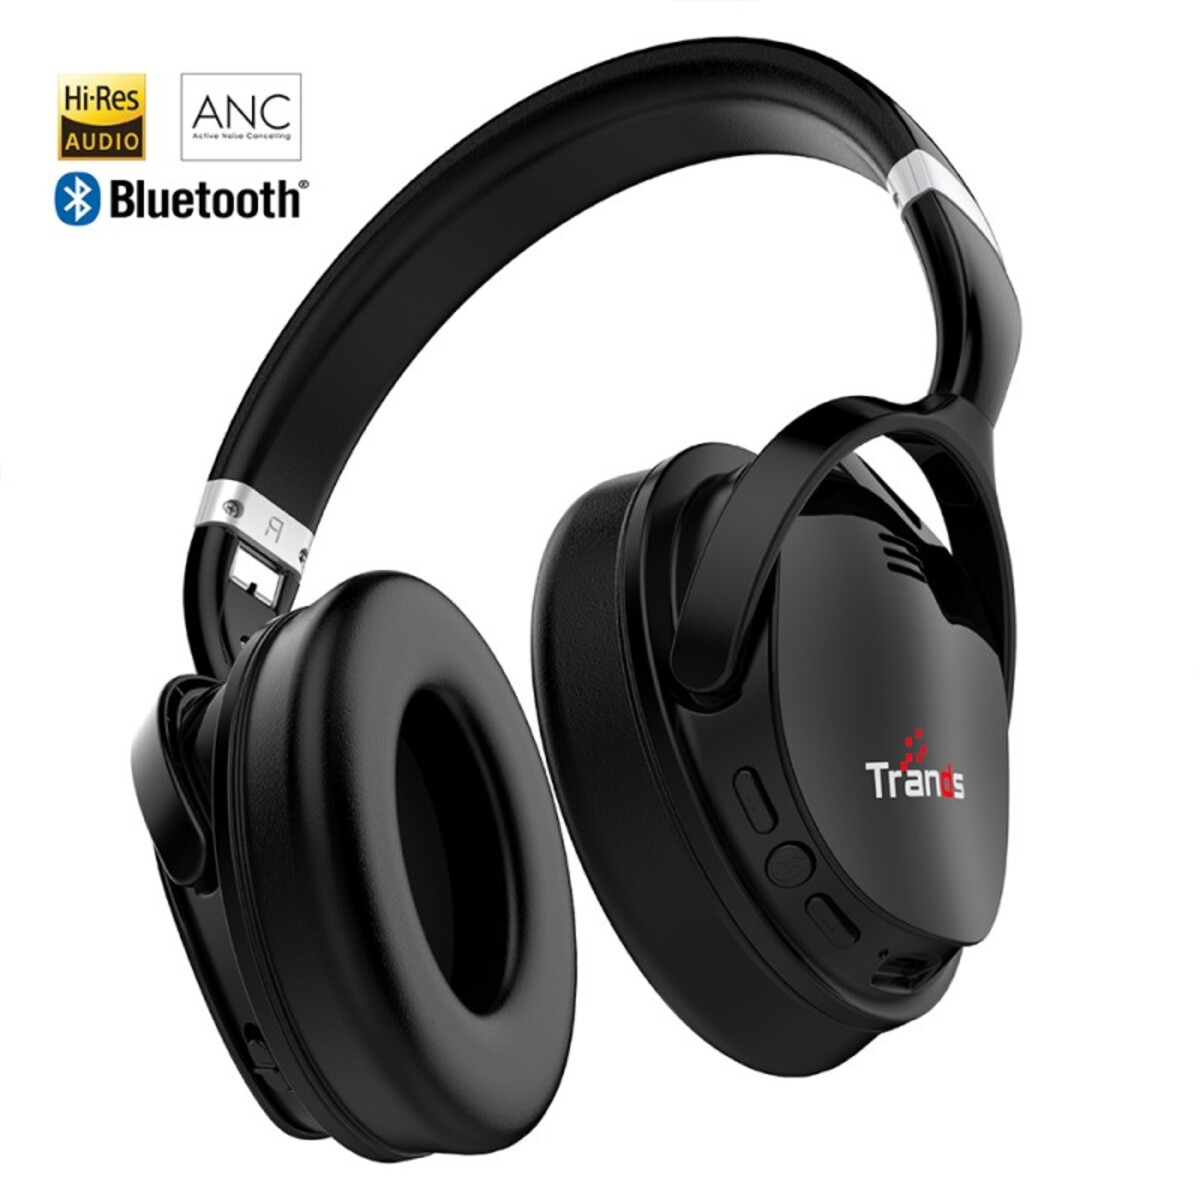 Trands Play Loud Wireless Bluetooth Active Noise Cancelling Stereo Headset VTH118